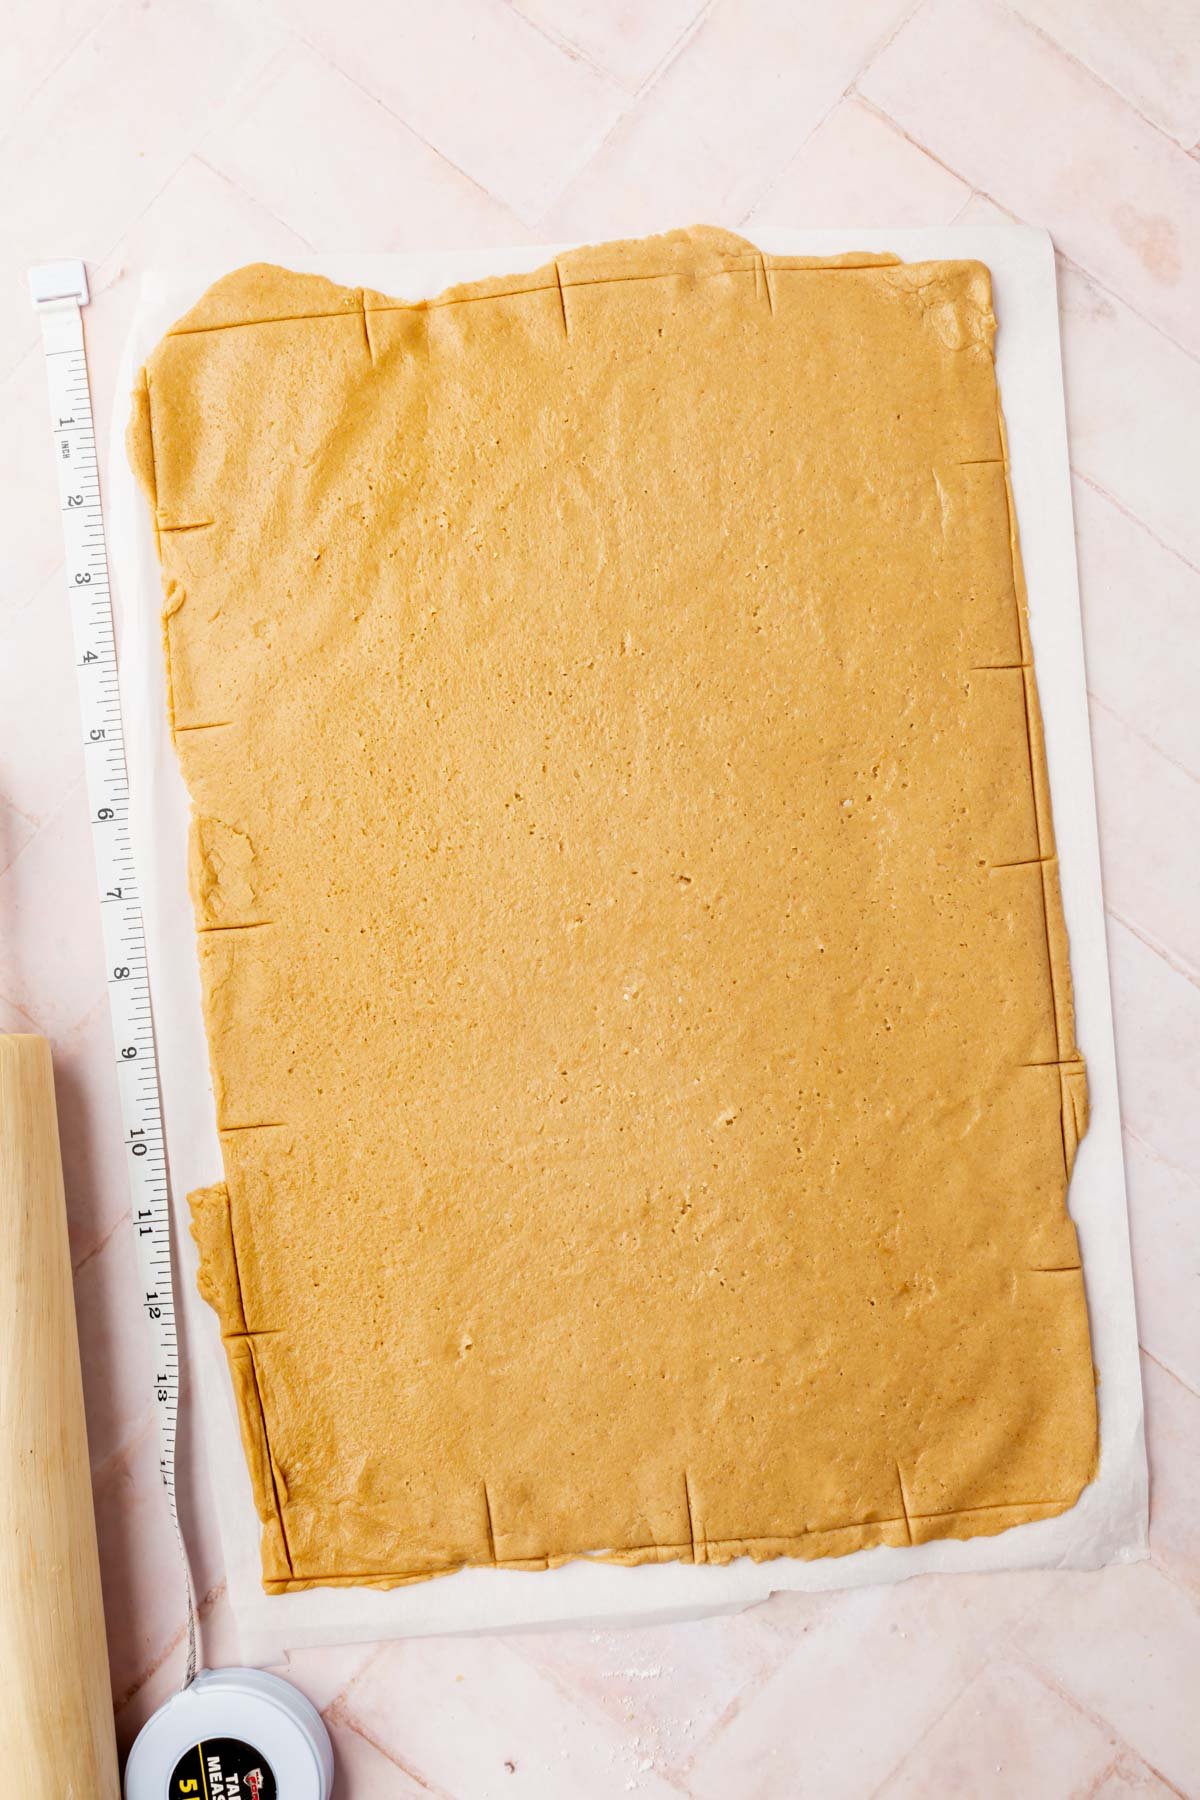 Graham cracker dough rolled out onto a piece of parchment paper with a measuring tape and a rolling pin next to it.